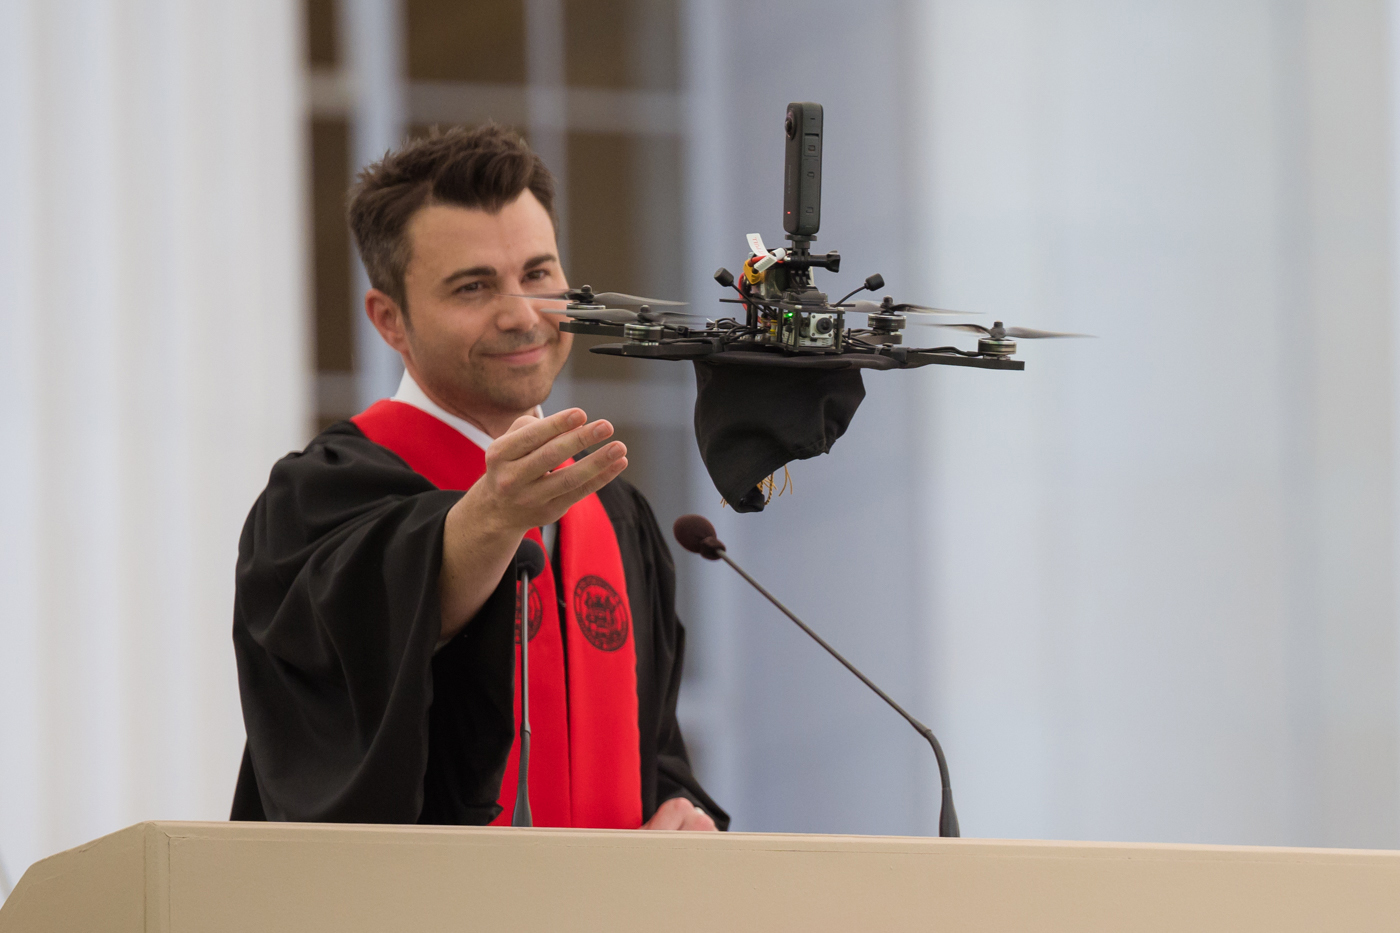 After his 2023 Commencement address, Mark Rober affixed his mortarboard to a drone and sent it soaring over the Great Dome. His remarks and grand finale drew a standing ovation from the crowd.